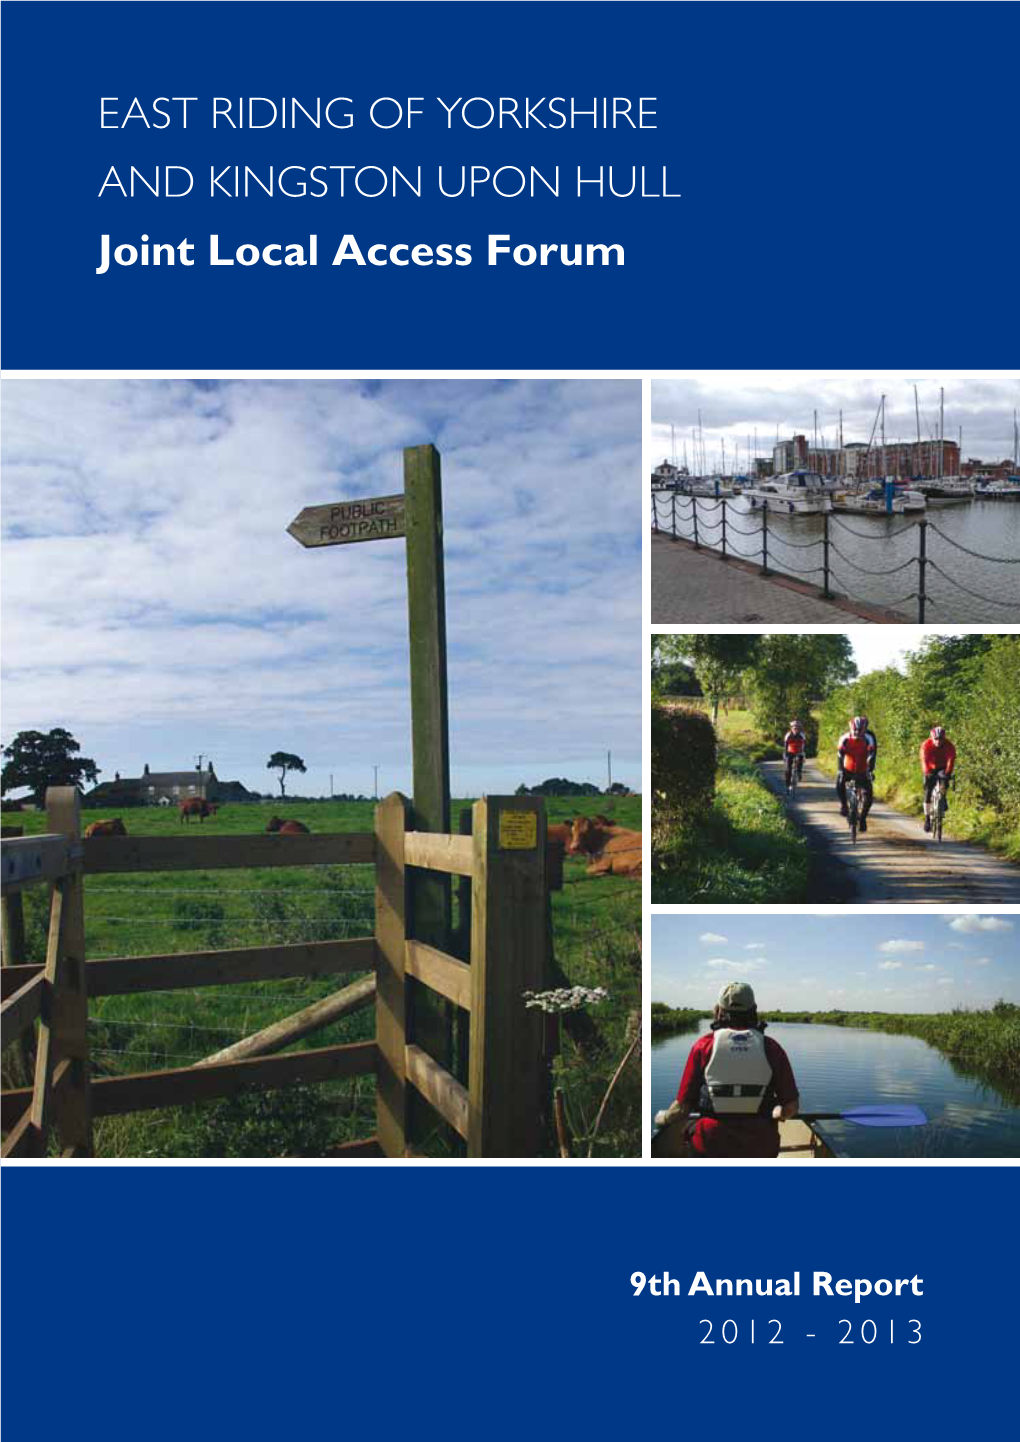 EAST RIDING of YORKSHIRE and KINGSTON UPON HULL Joint Local Access Forum